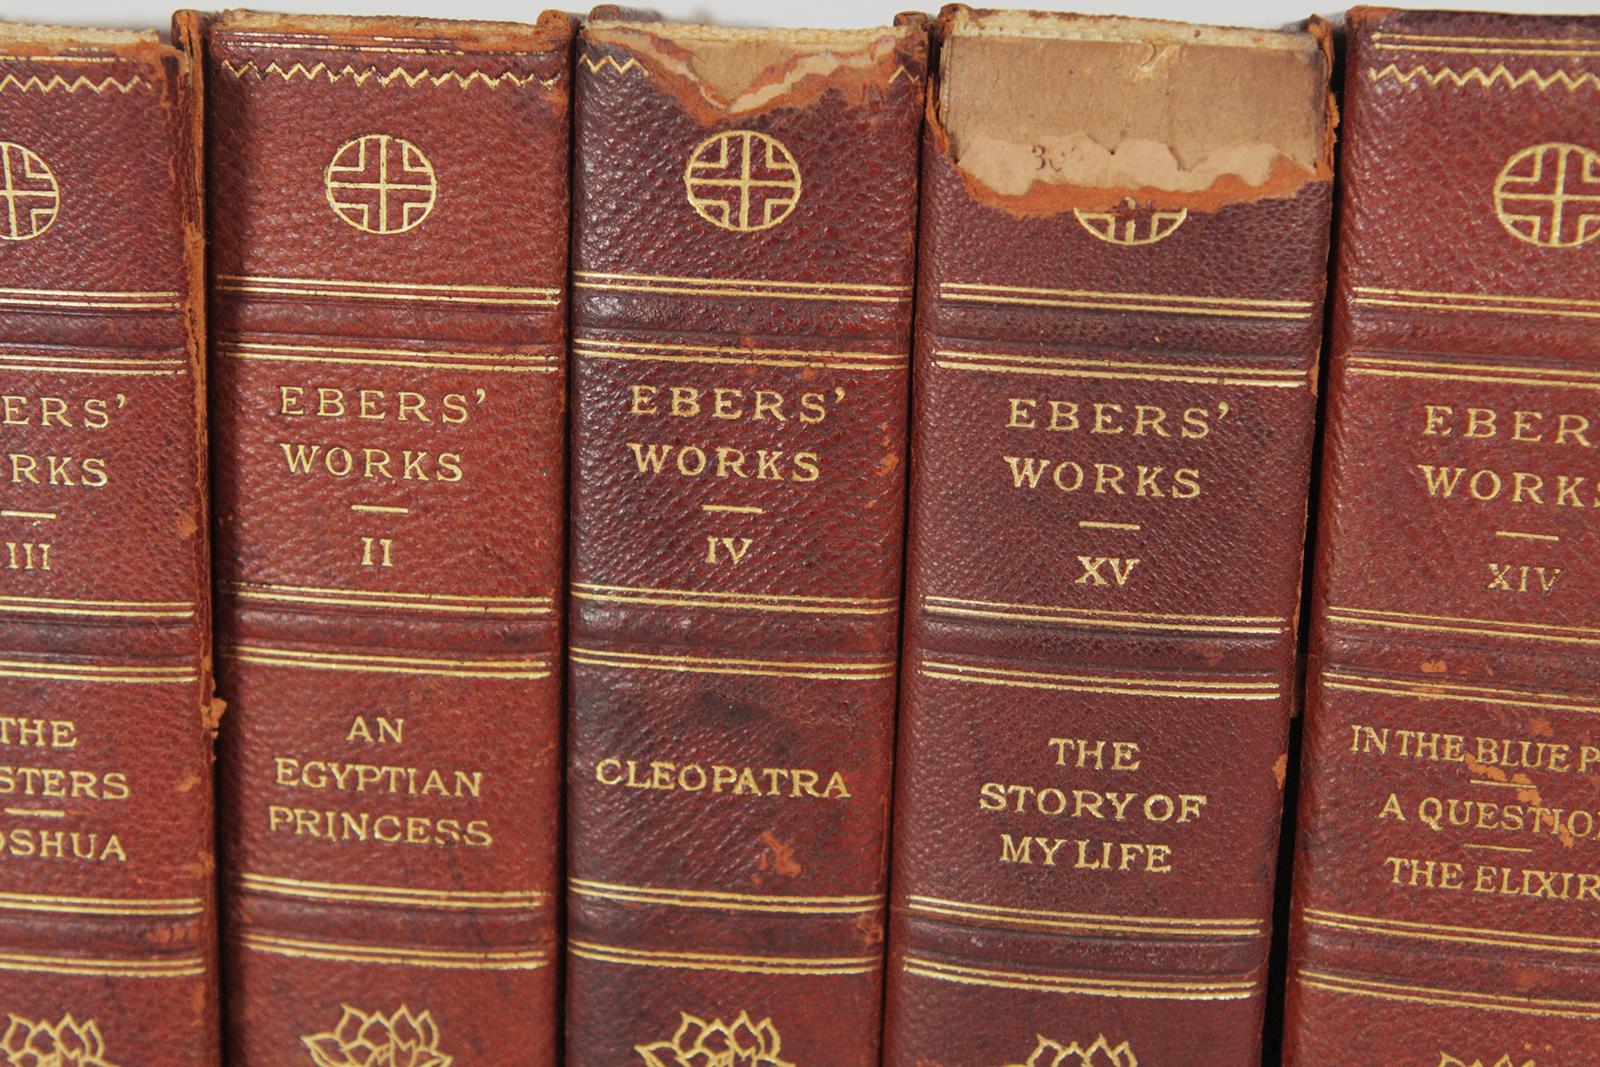 American Set of 13 Georg Ebers Works Leather Bound Books, 19th Century